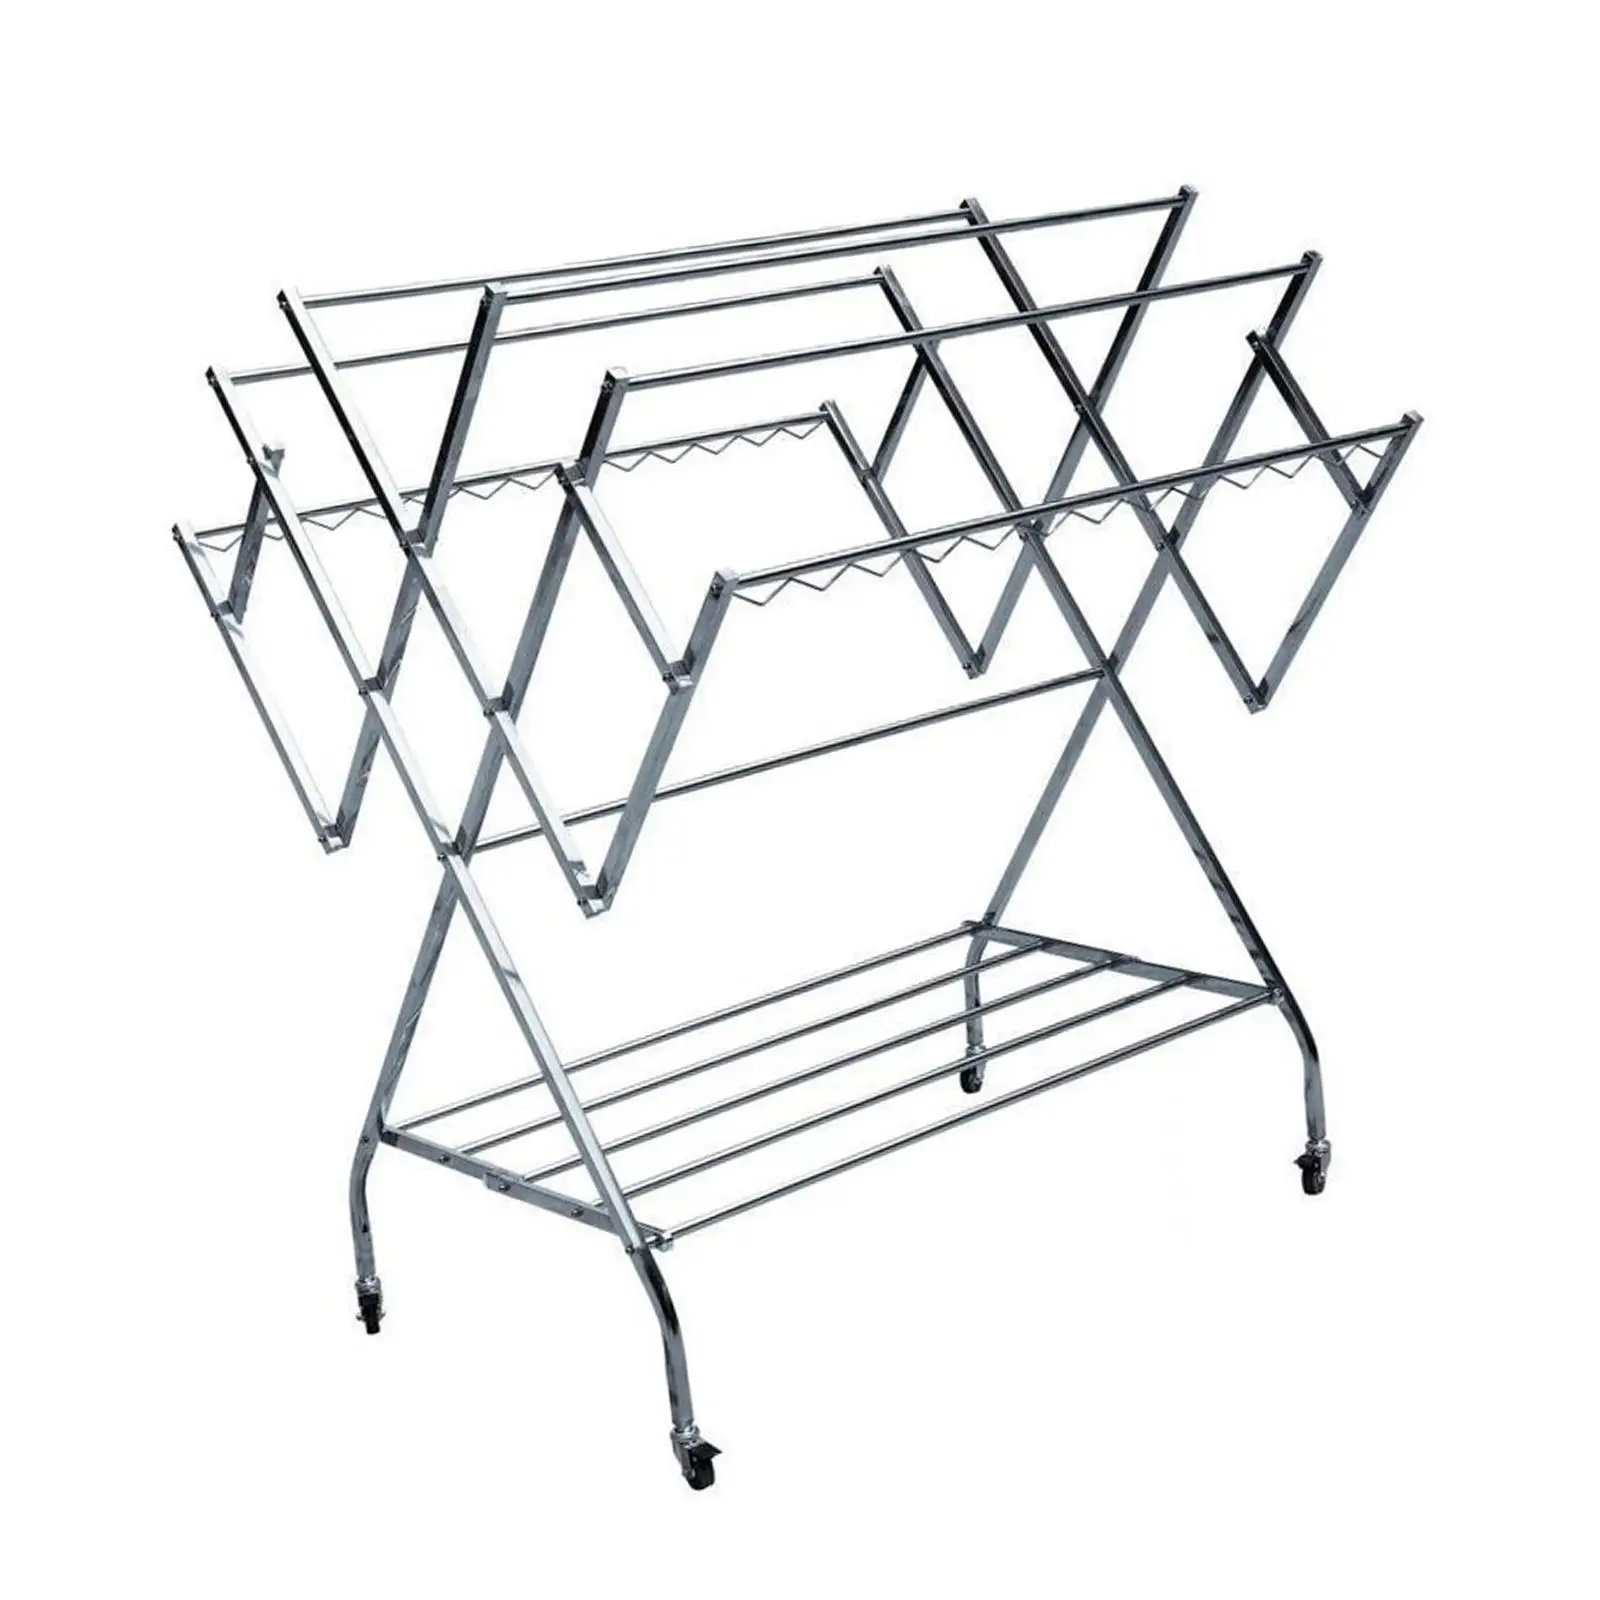 Folding Clothes Drying Rack Indoor and Outdoor Drying Poles for Socks Quilts